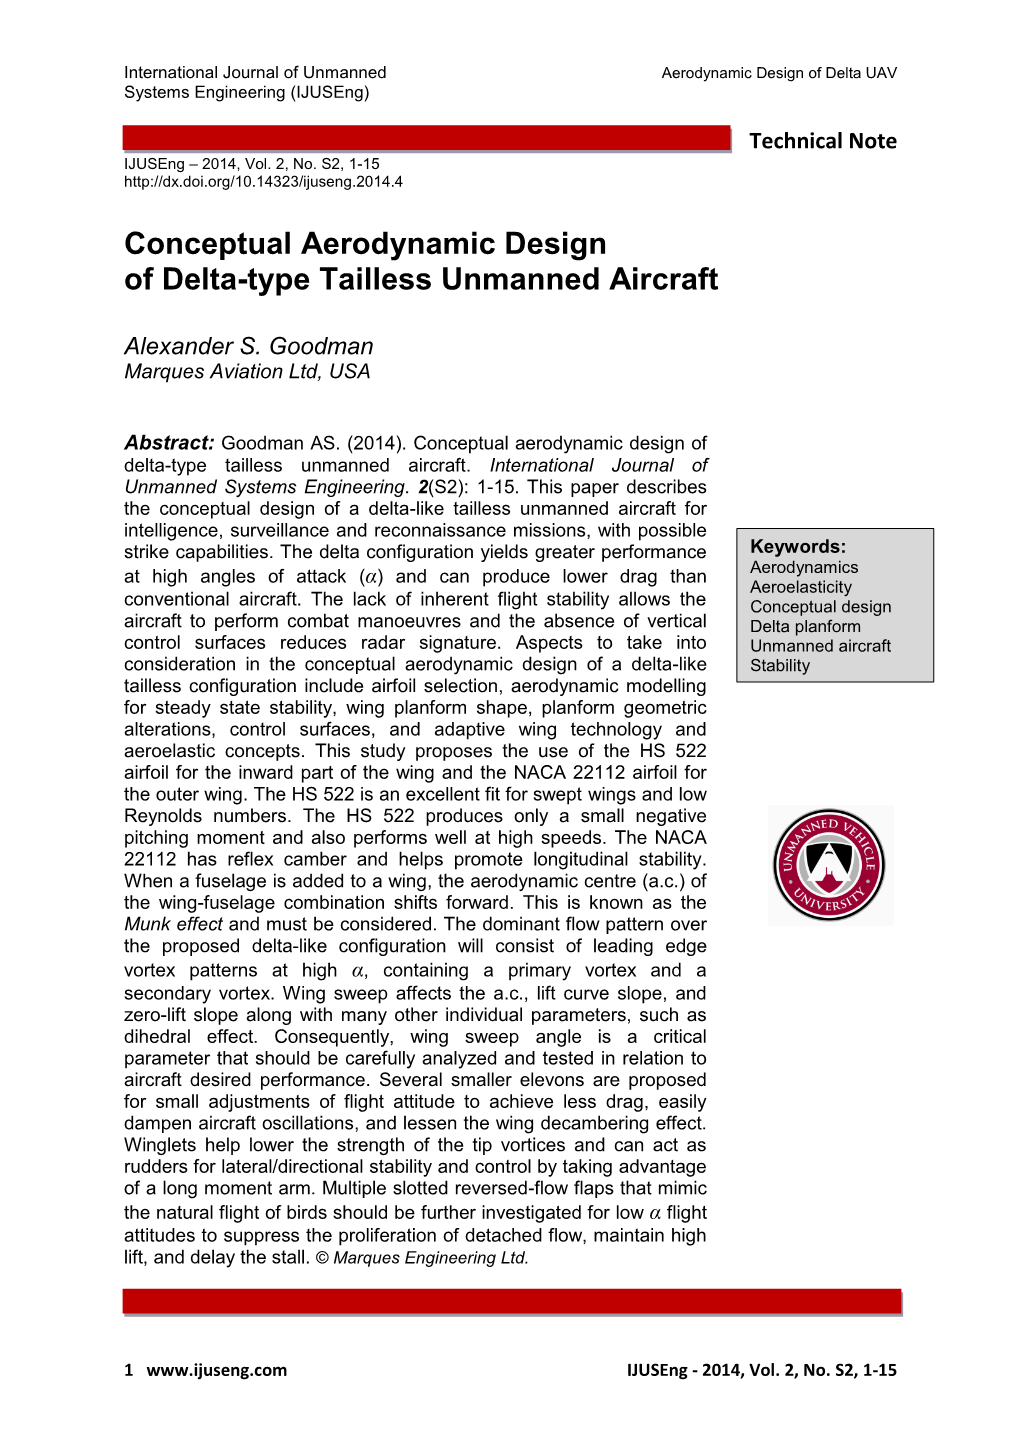 Conceptual Aerodynamic Design of Delta-Type Tailless Unmanned Aircraft